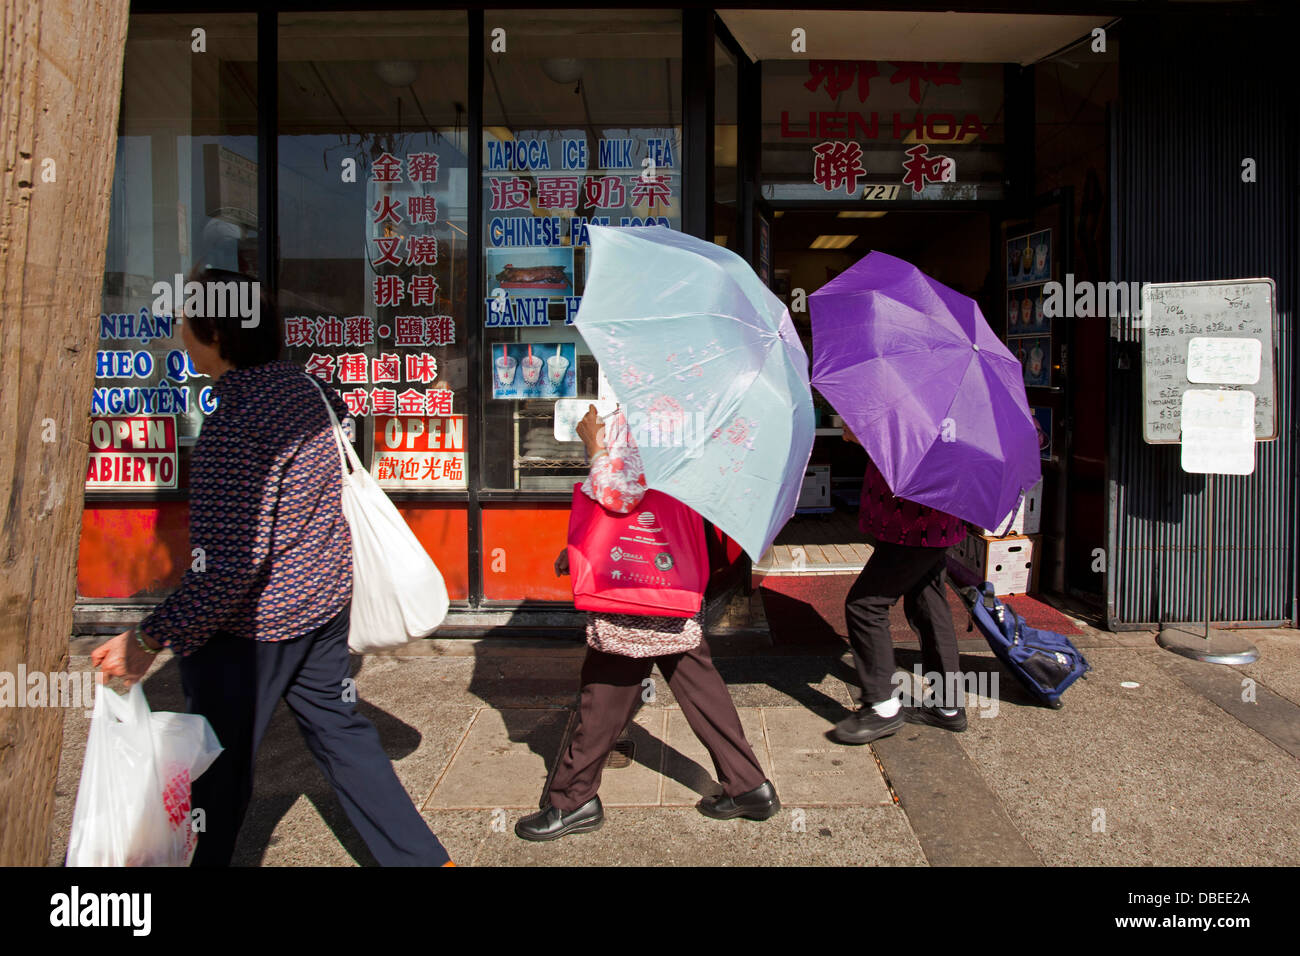 Record breaking heat in Chinatown. Women use umbrellas for shade. Los Angeles, California Stock Photo